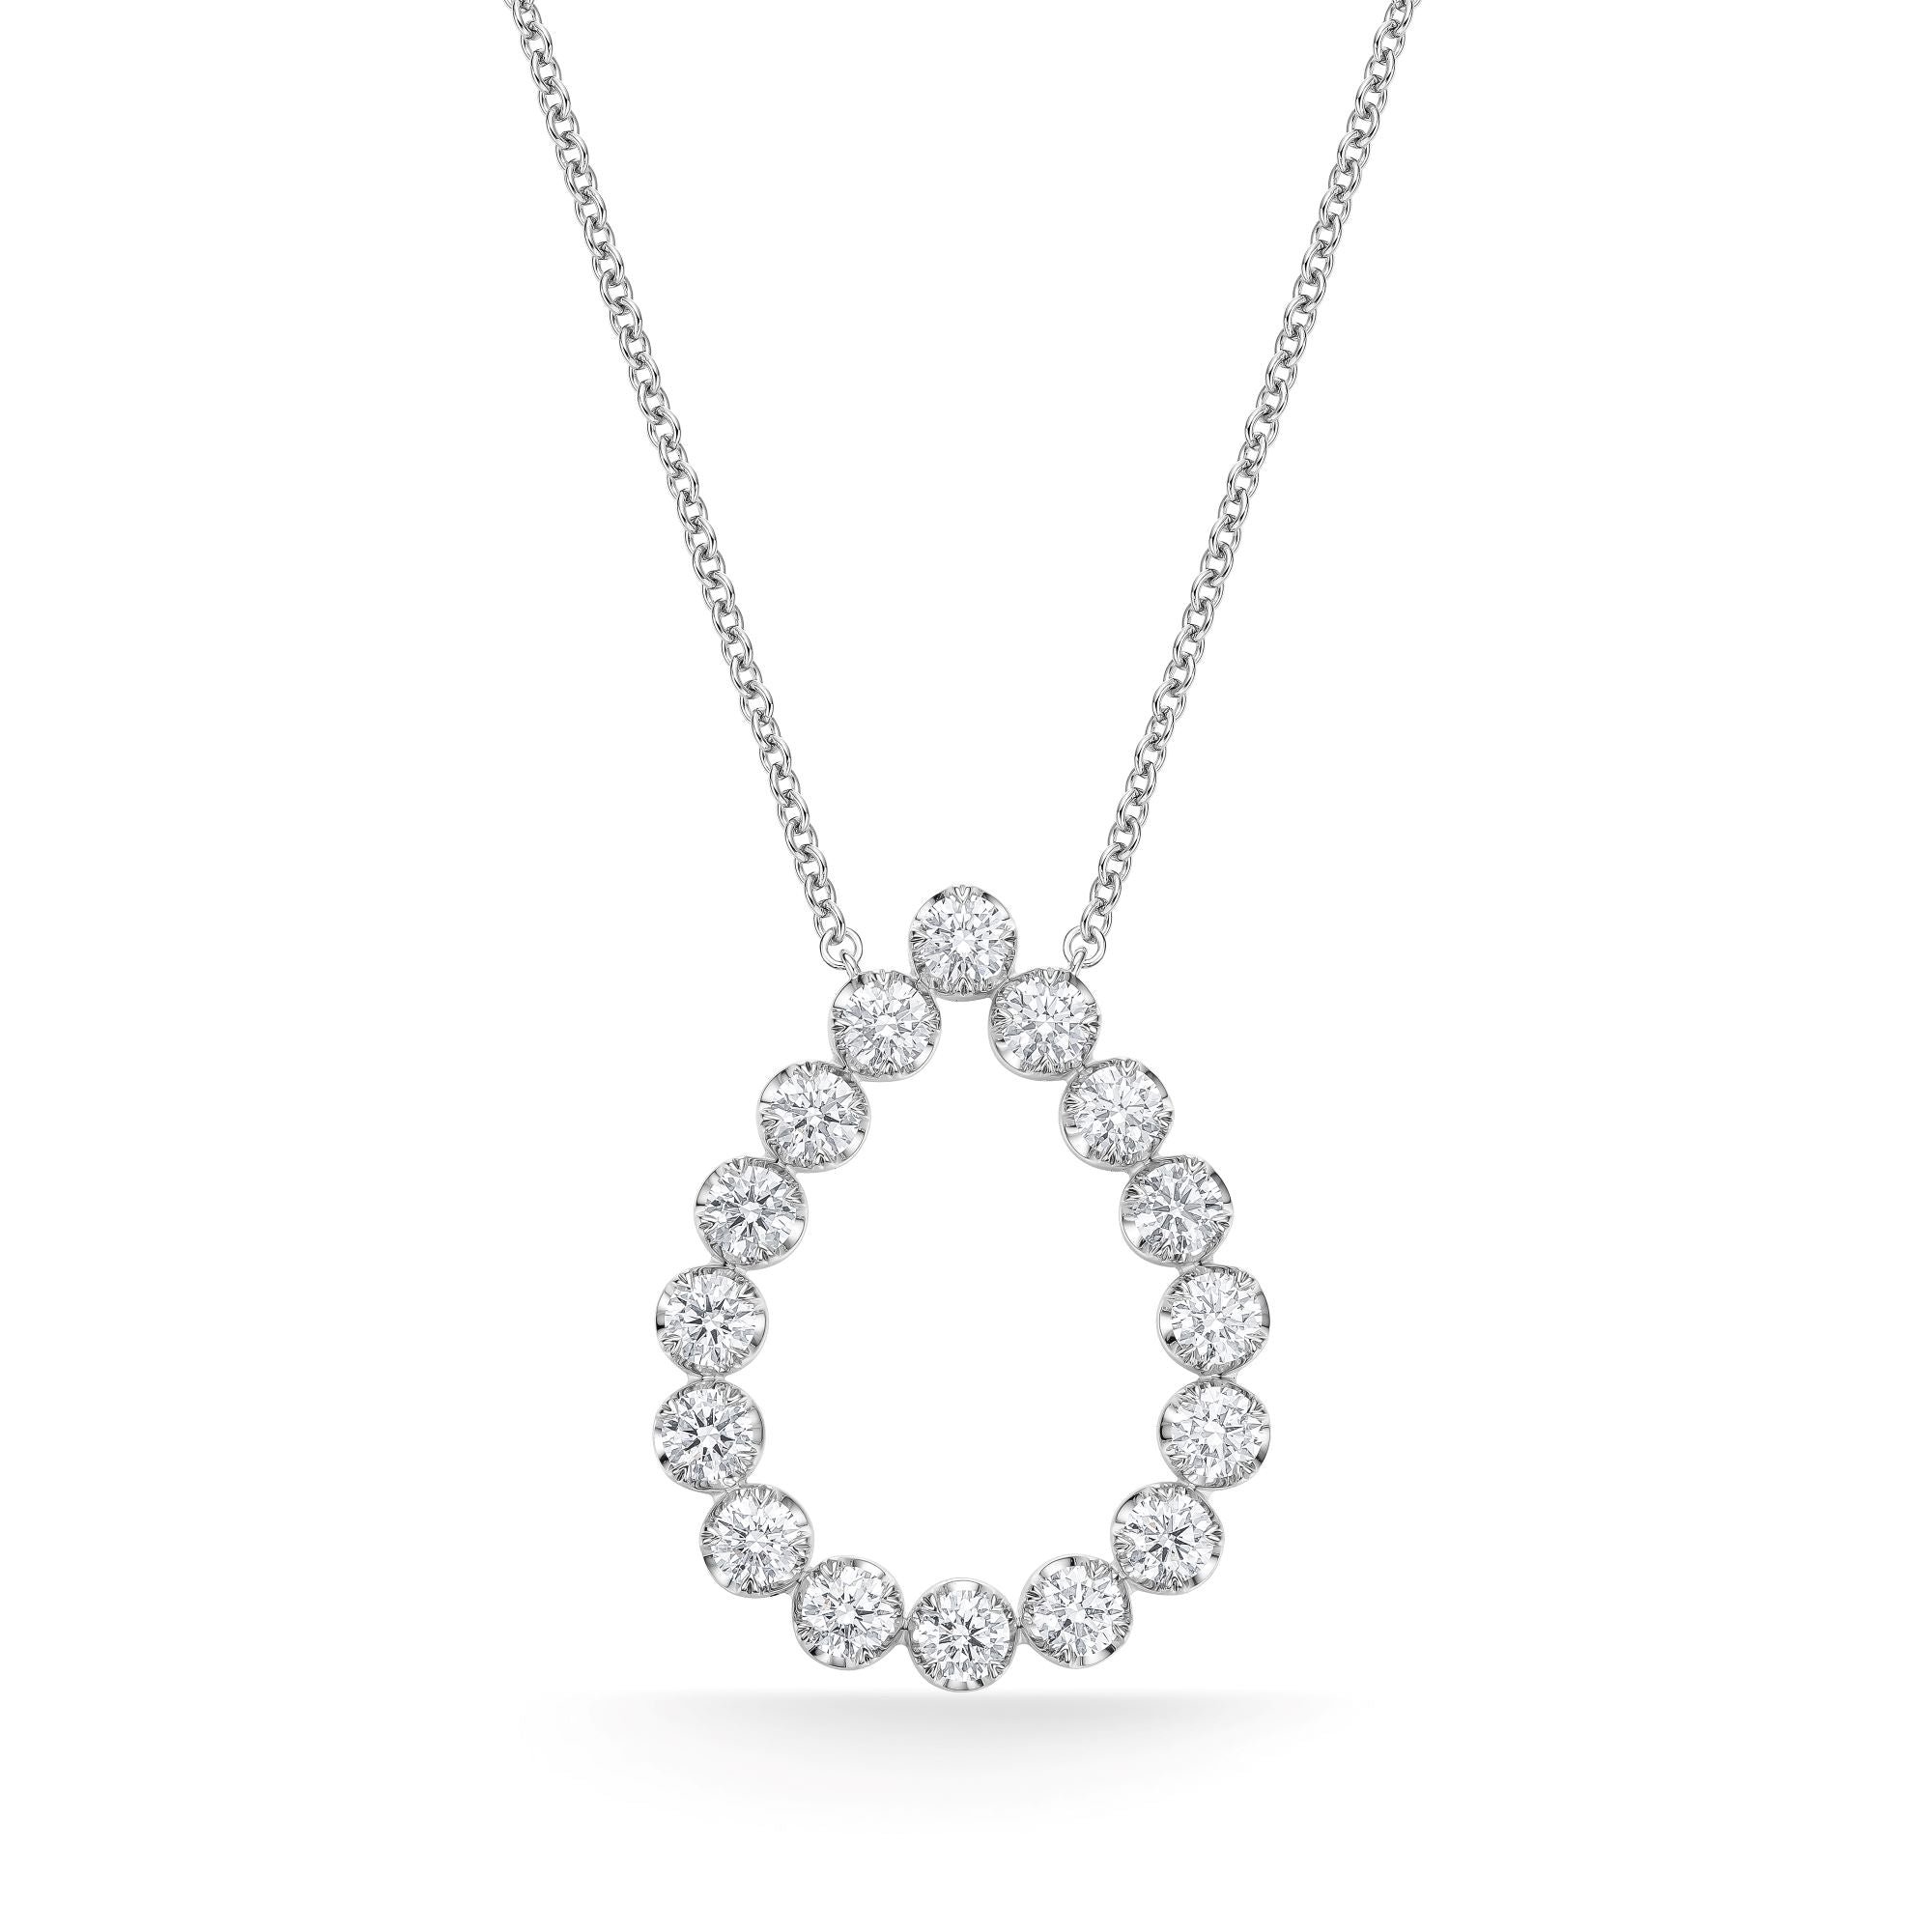 18KW PEAR SHAPED DIAMOND NECKLACE